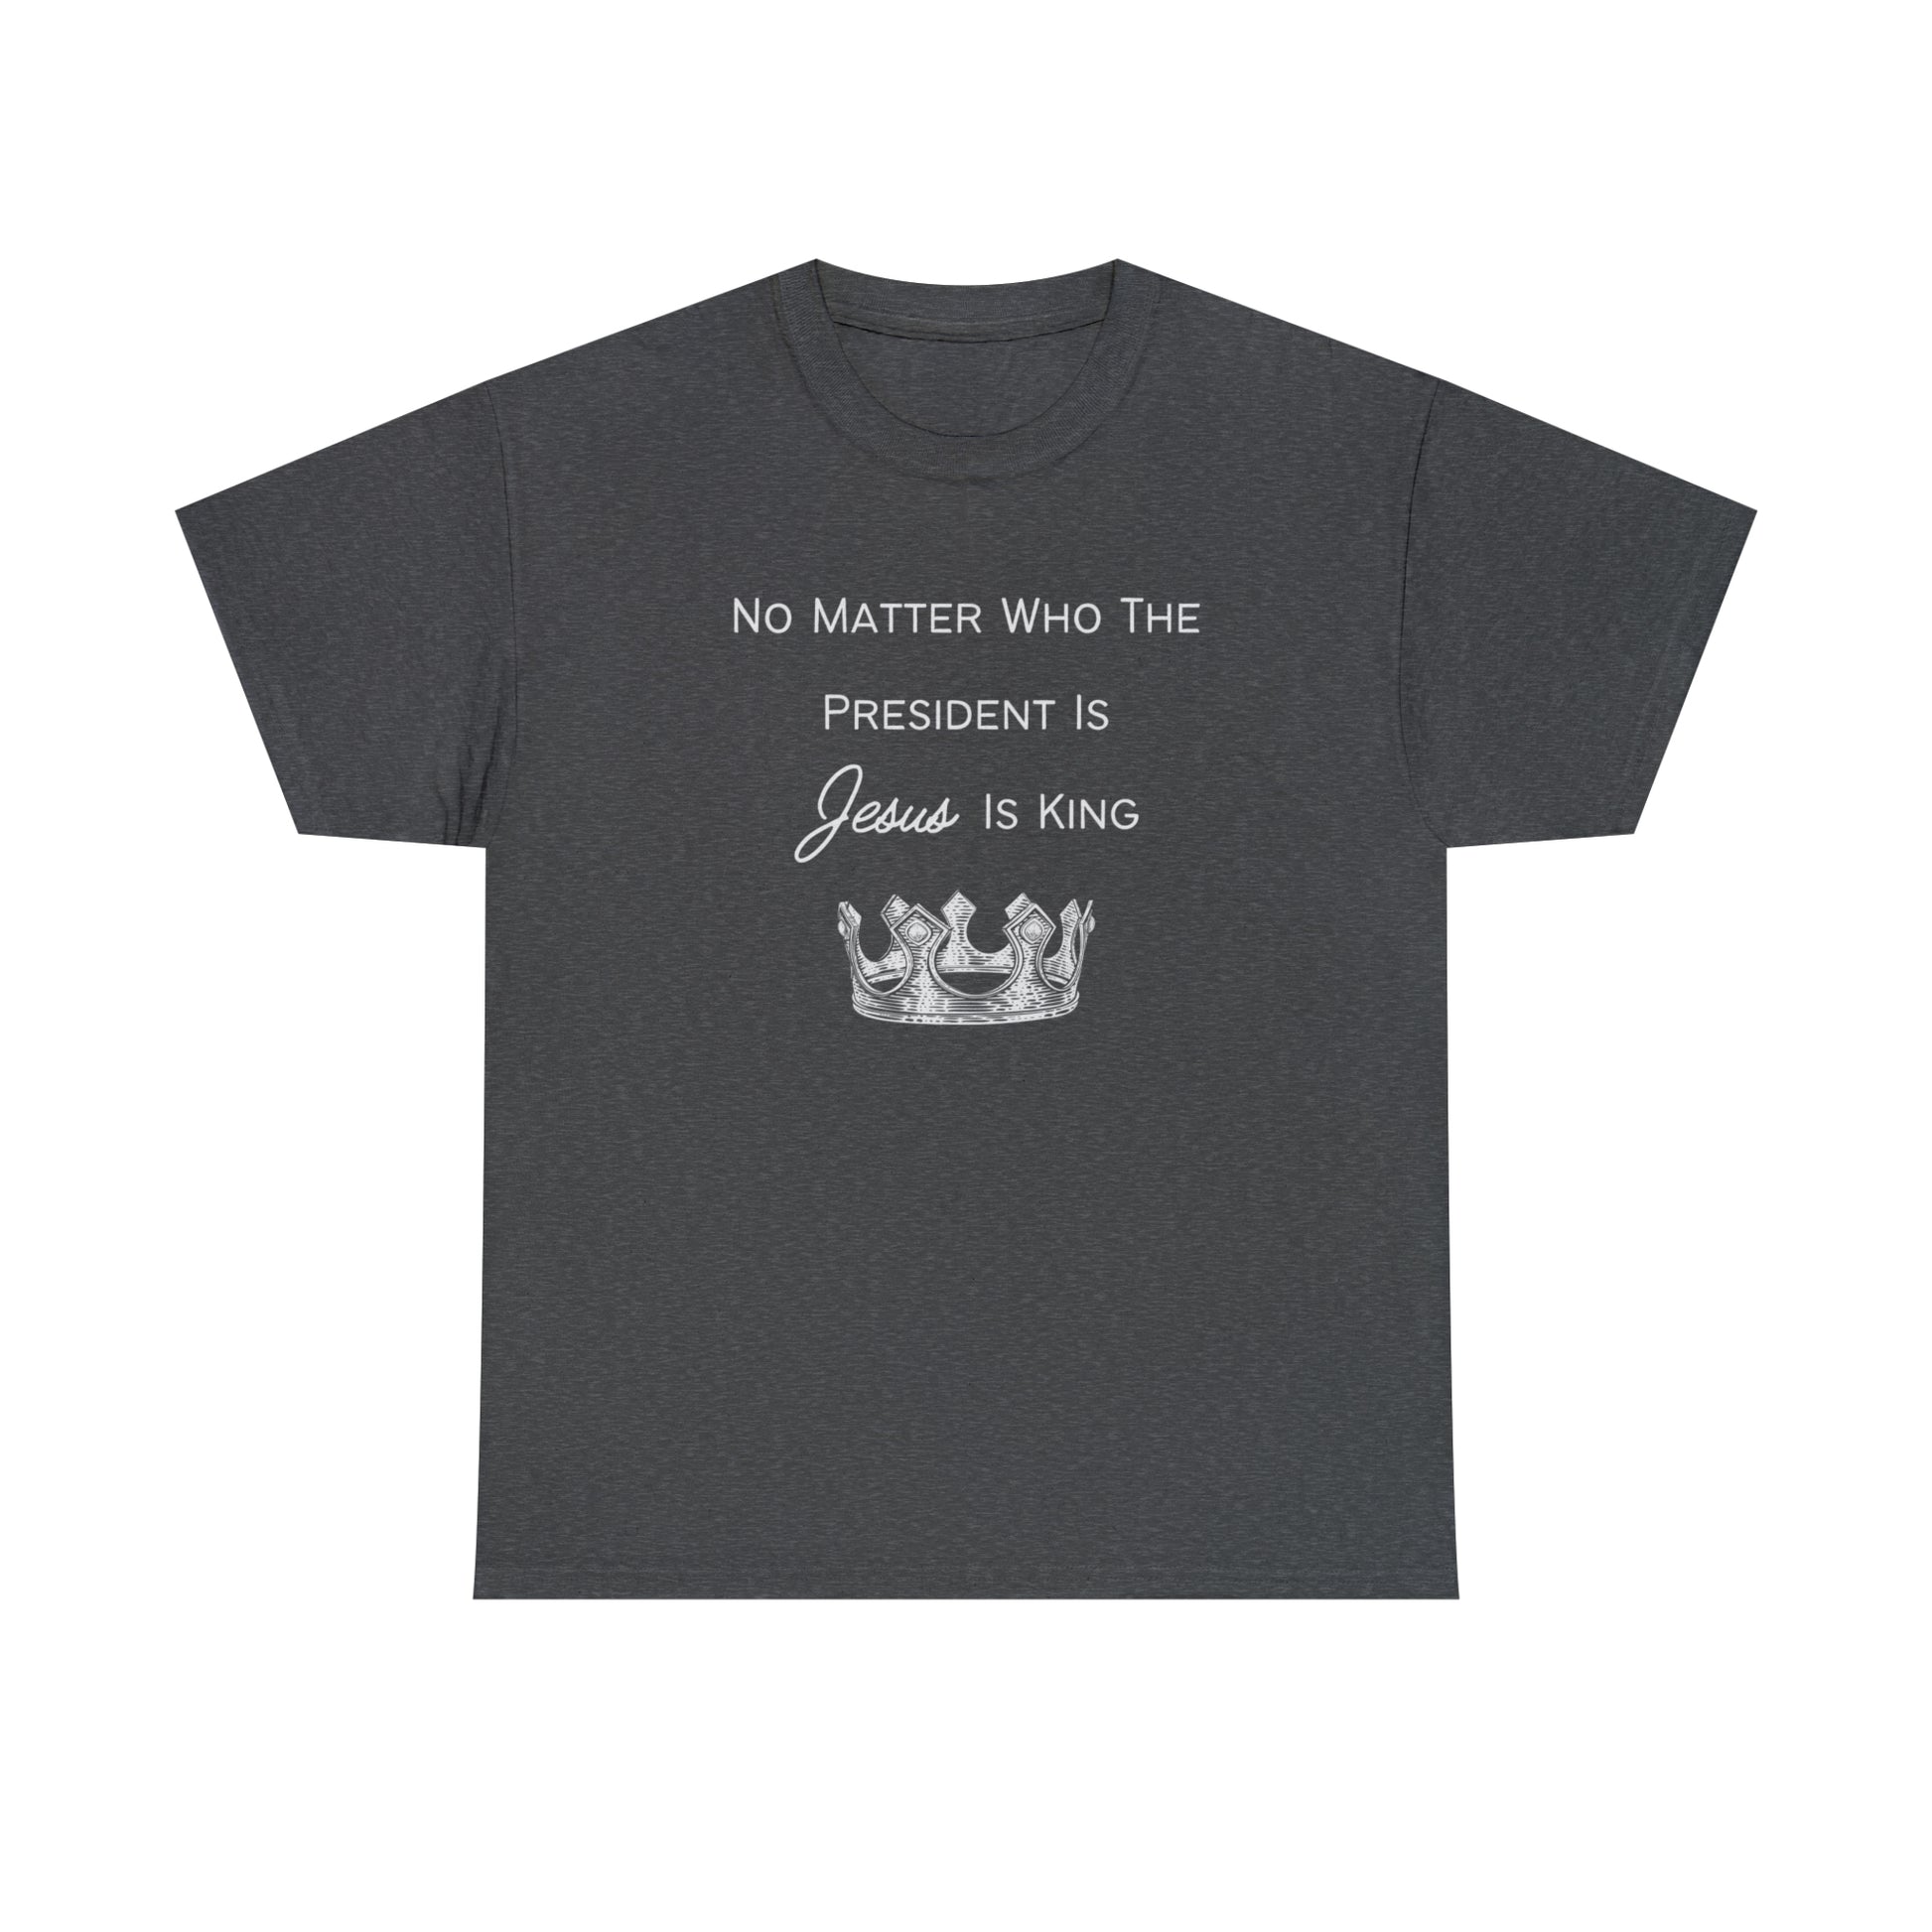 Timeless truth "Jesus Is King" t-shirt for believers